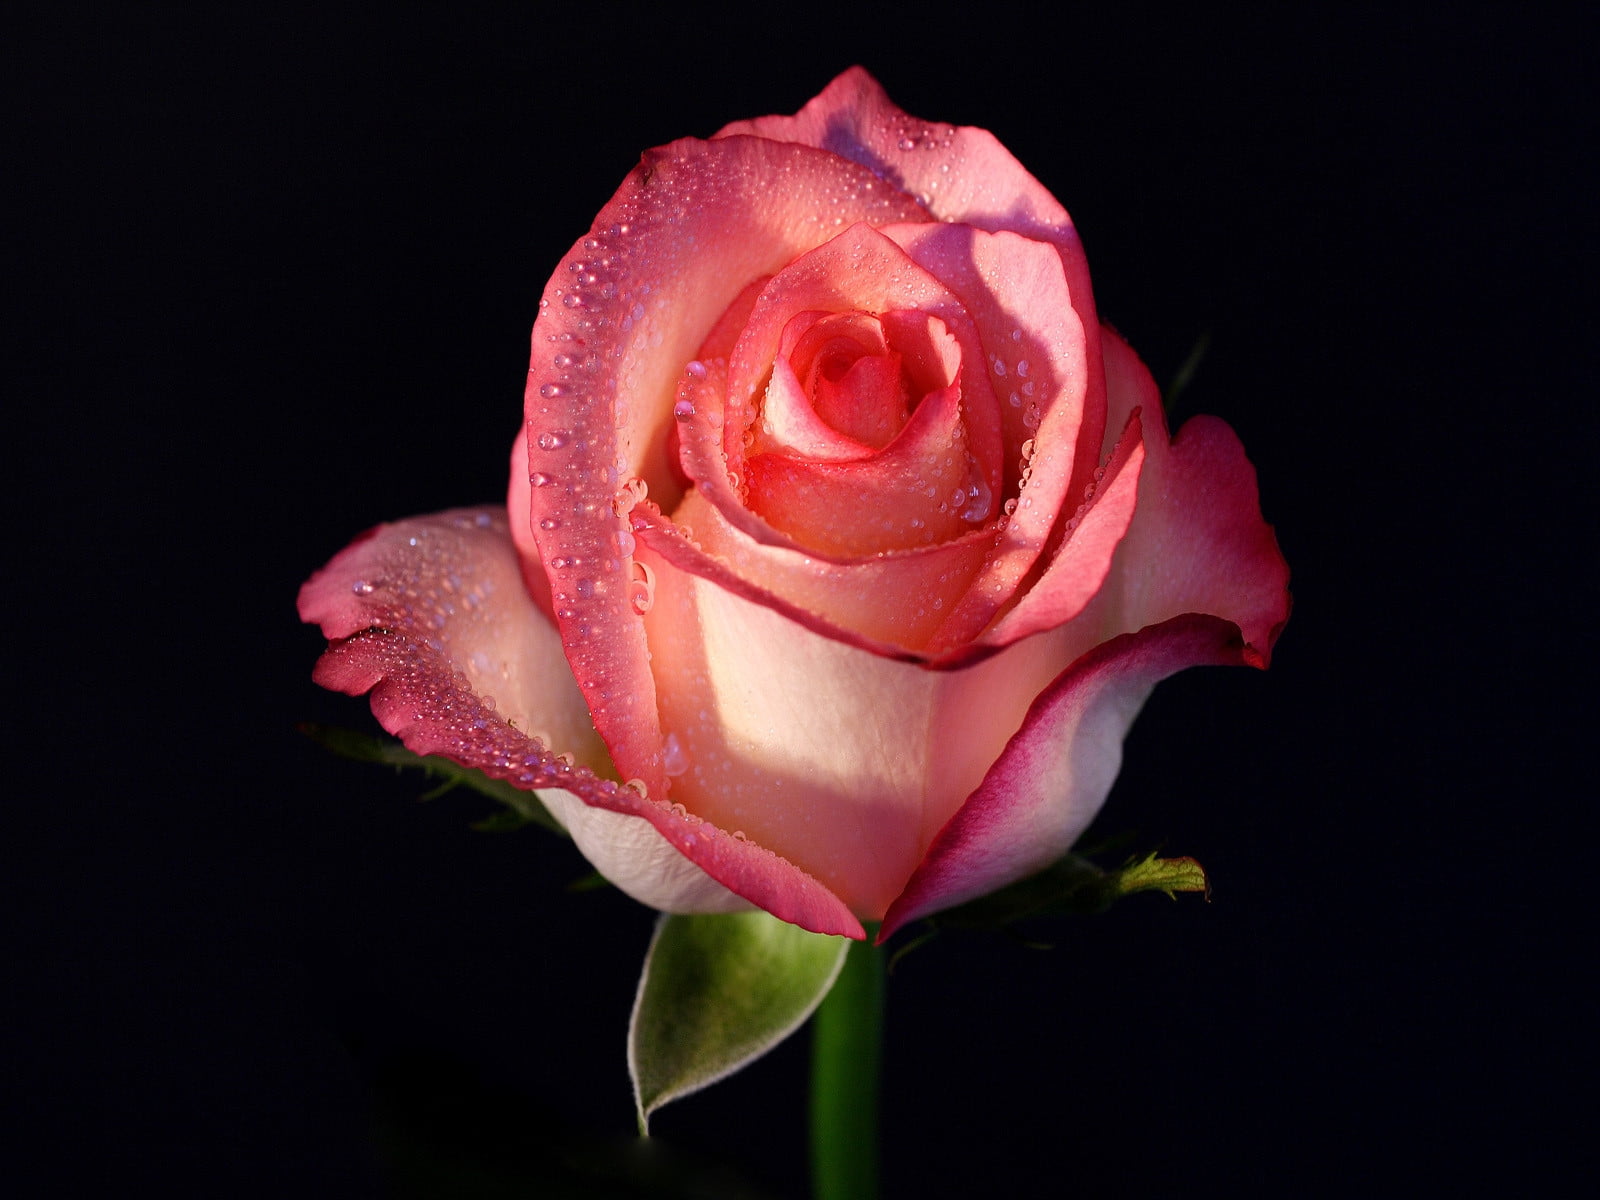 pink Rose in bloom with dew drops close-up photo